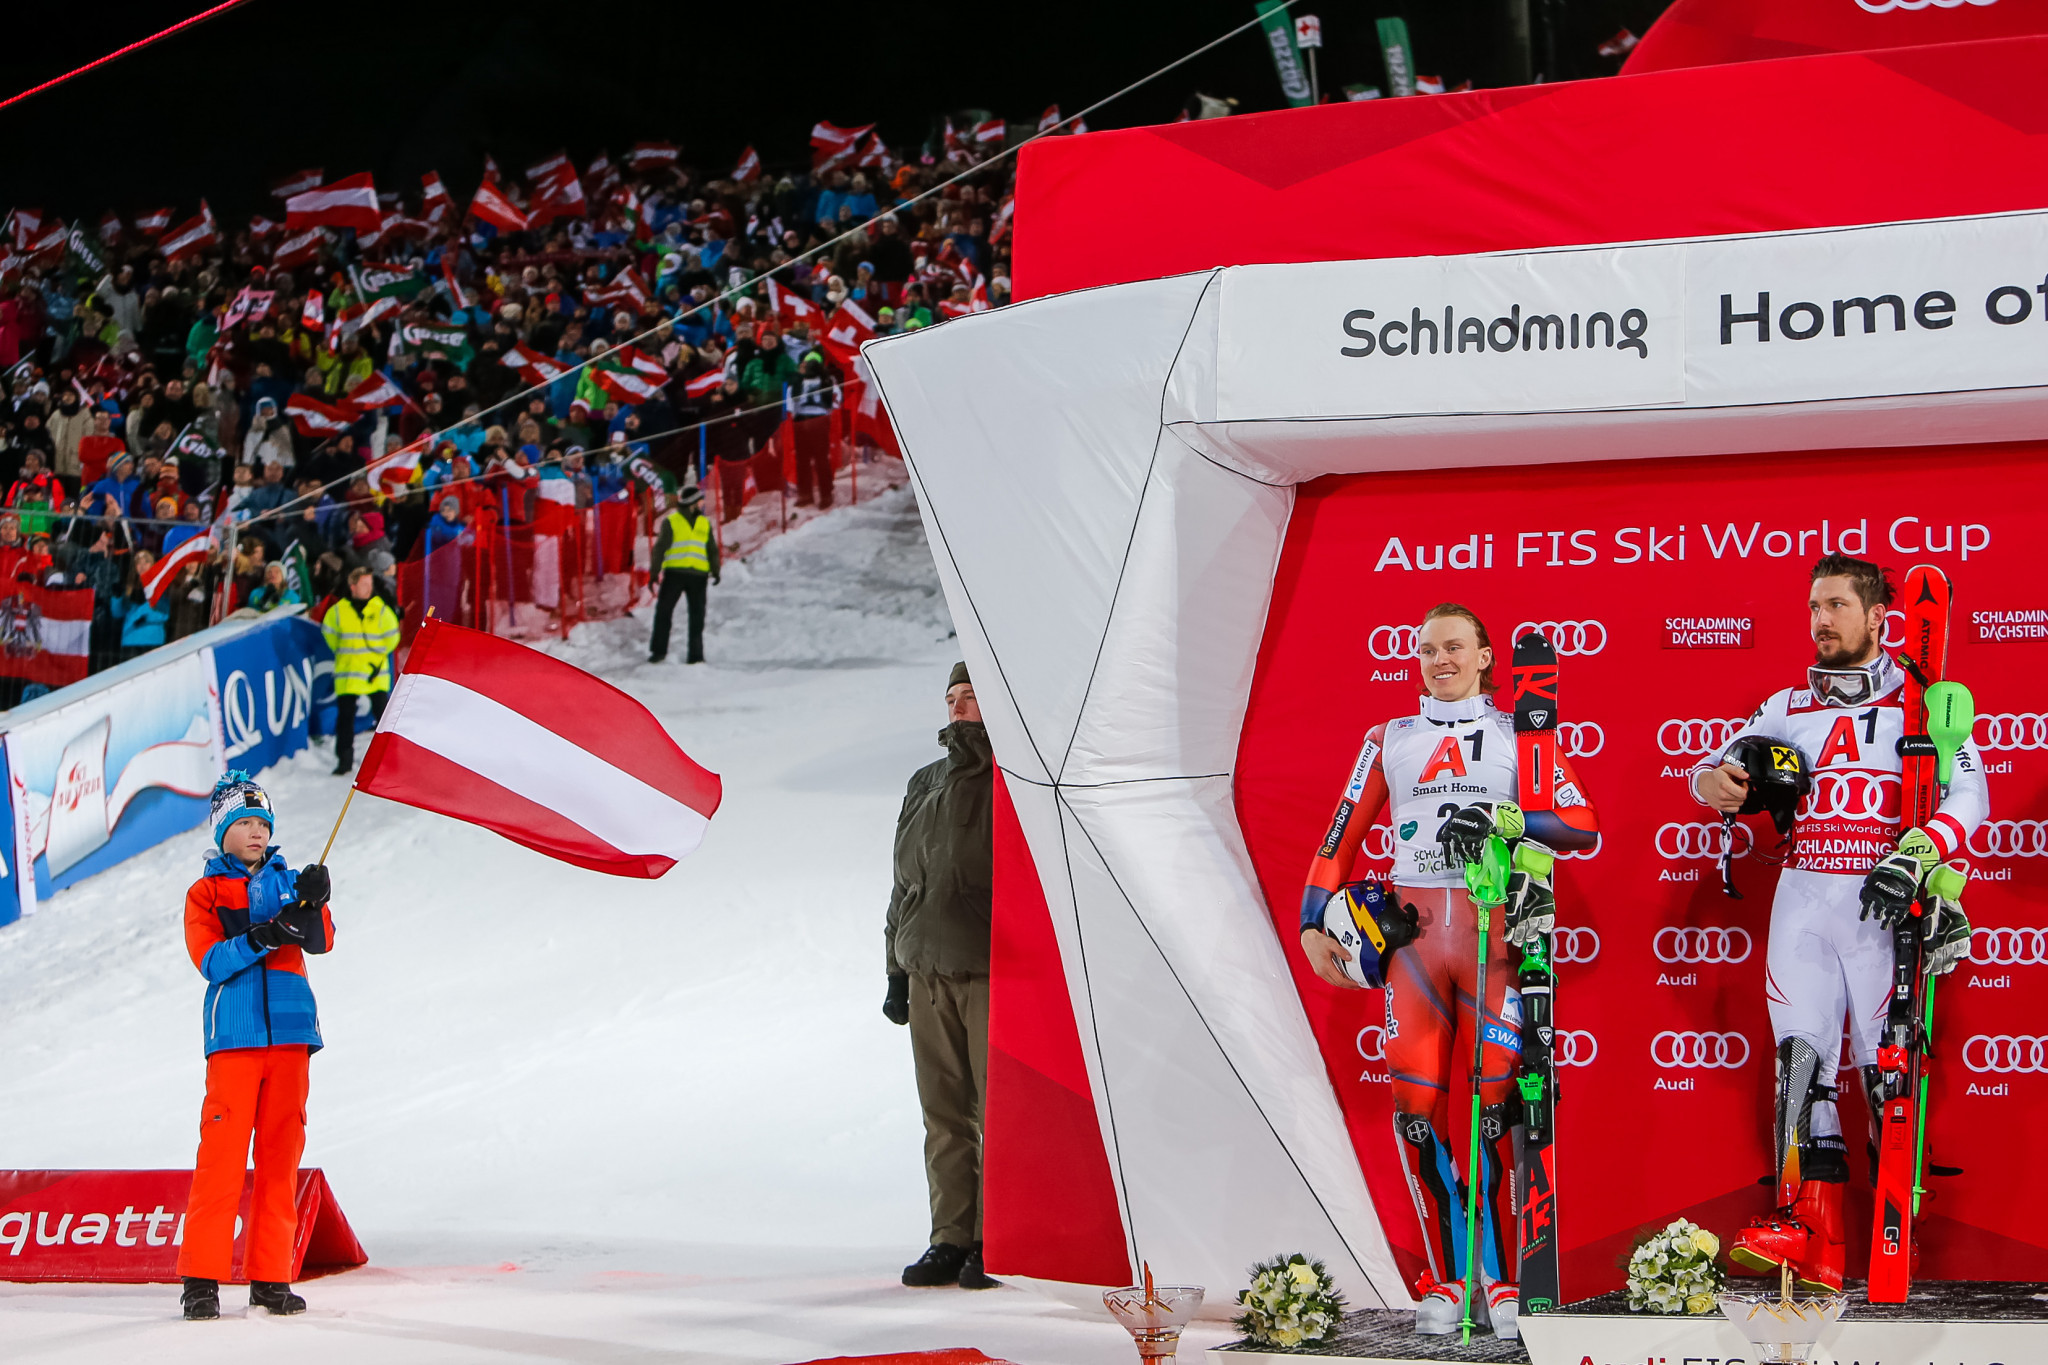 Graz and Schladming expected to file bid for 2026 Winter Olympics before March 31 deadline